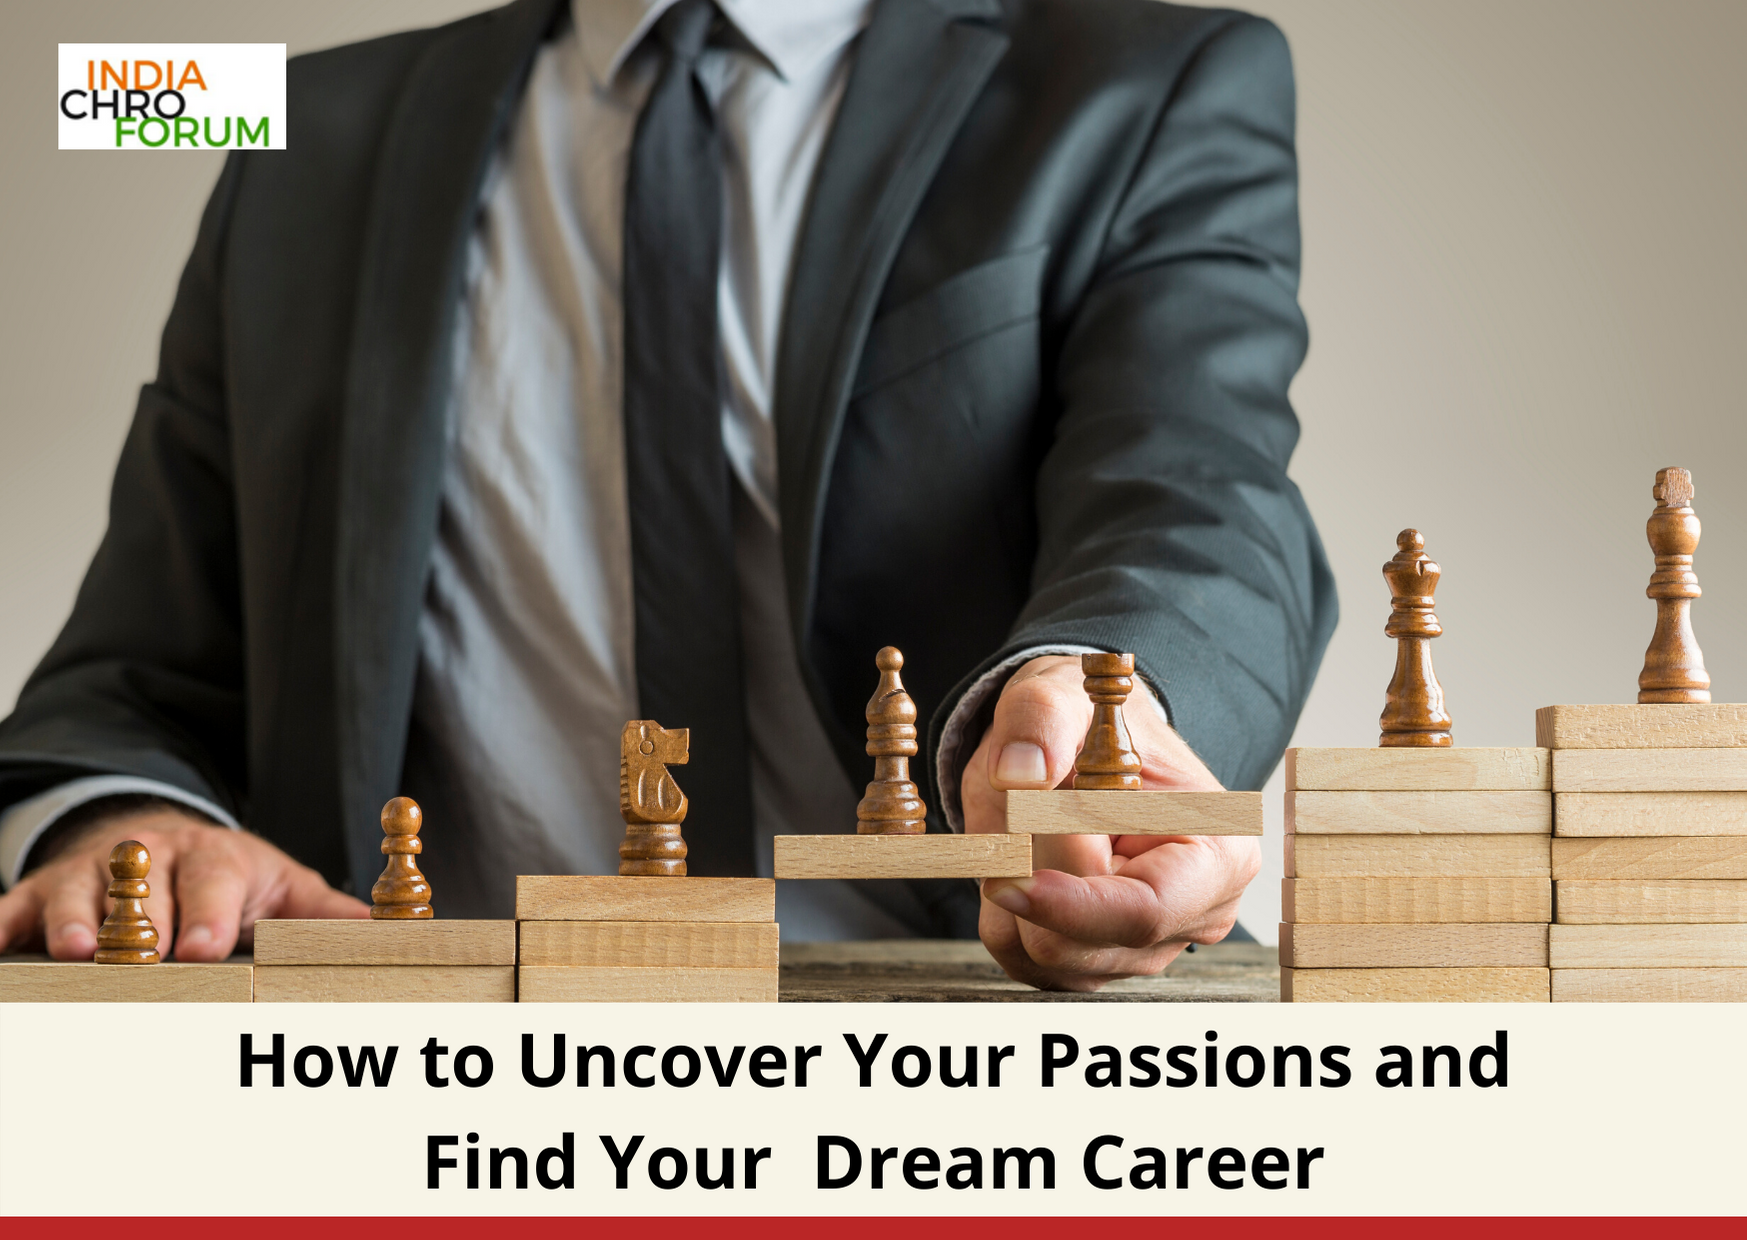  How to Uncover Your Passions and Find Your Dream Career